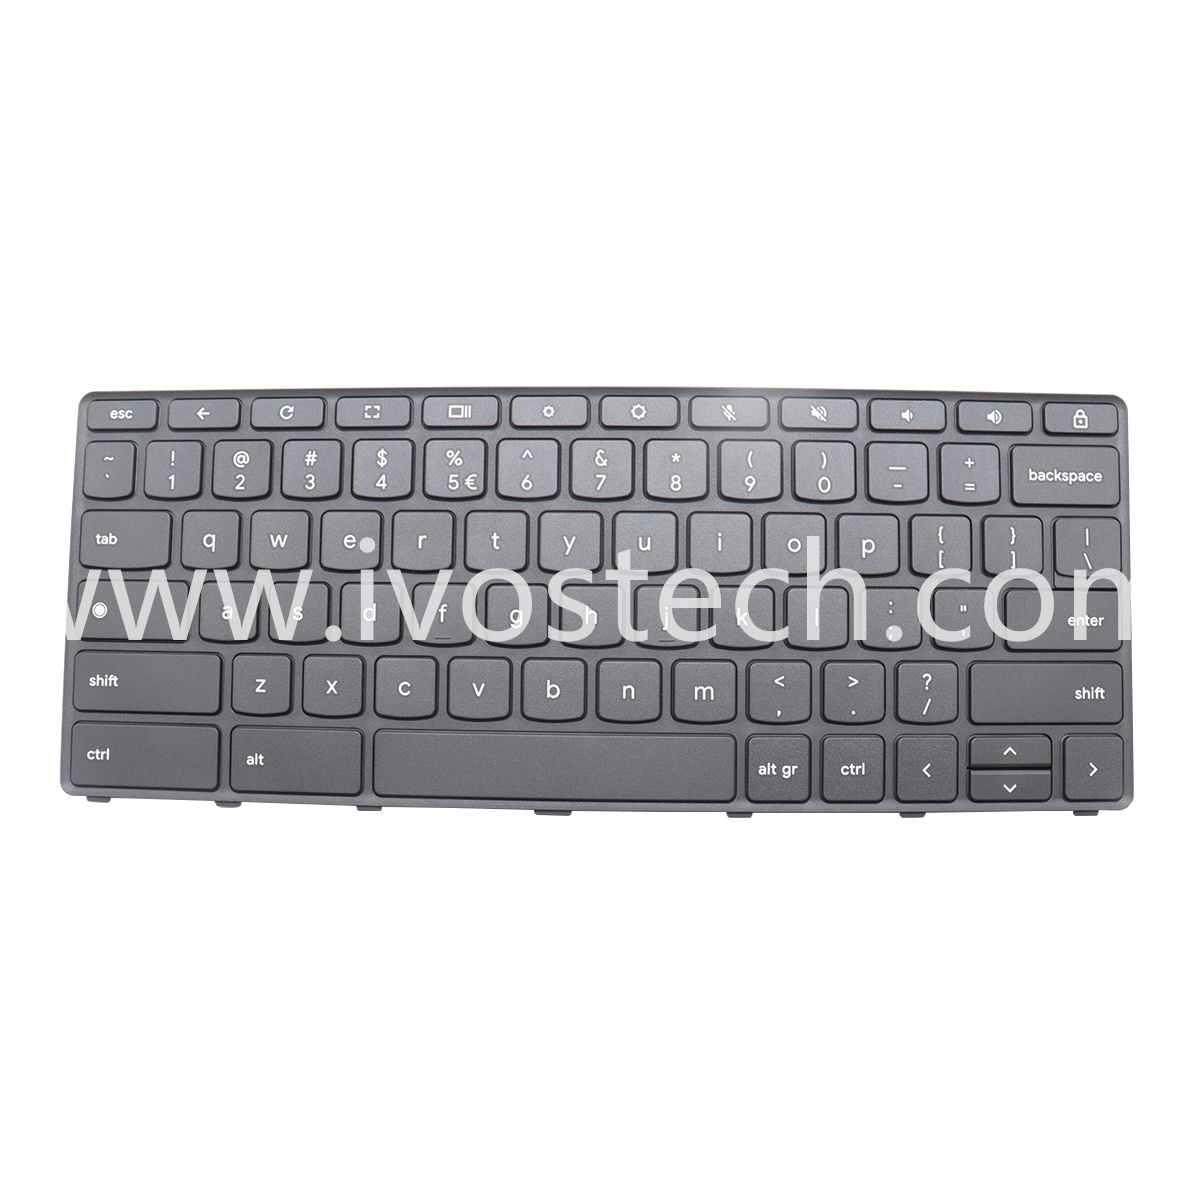 5N21L44082 Laptop Replacement Keyboard US Layout for Lenovo 300e Yoga Chromebook Gen 4